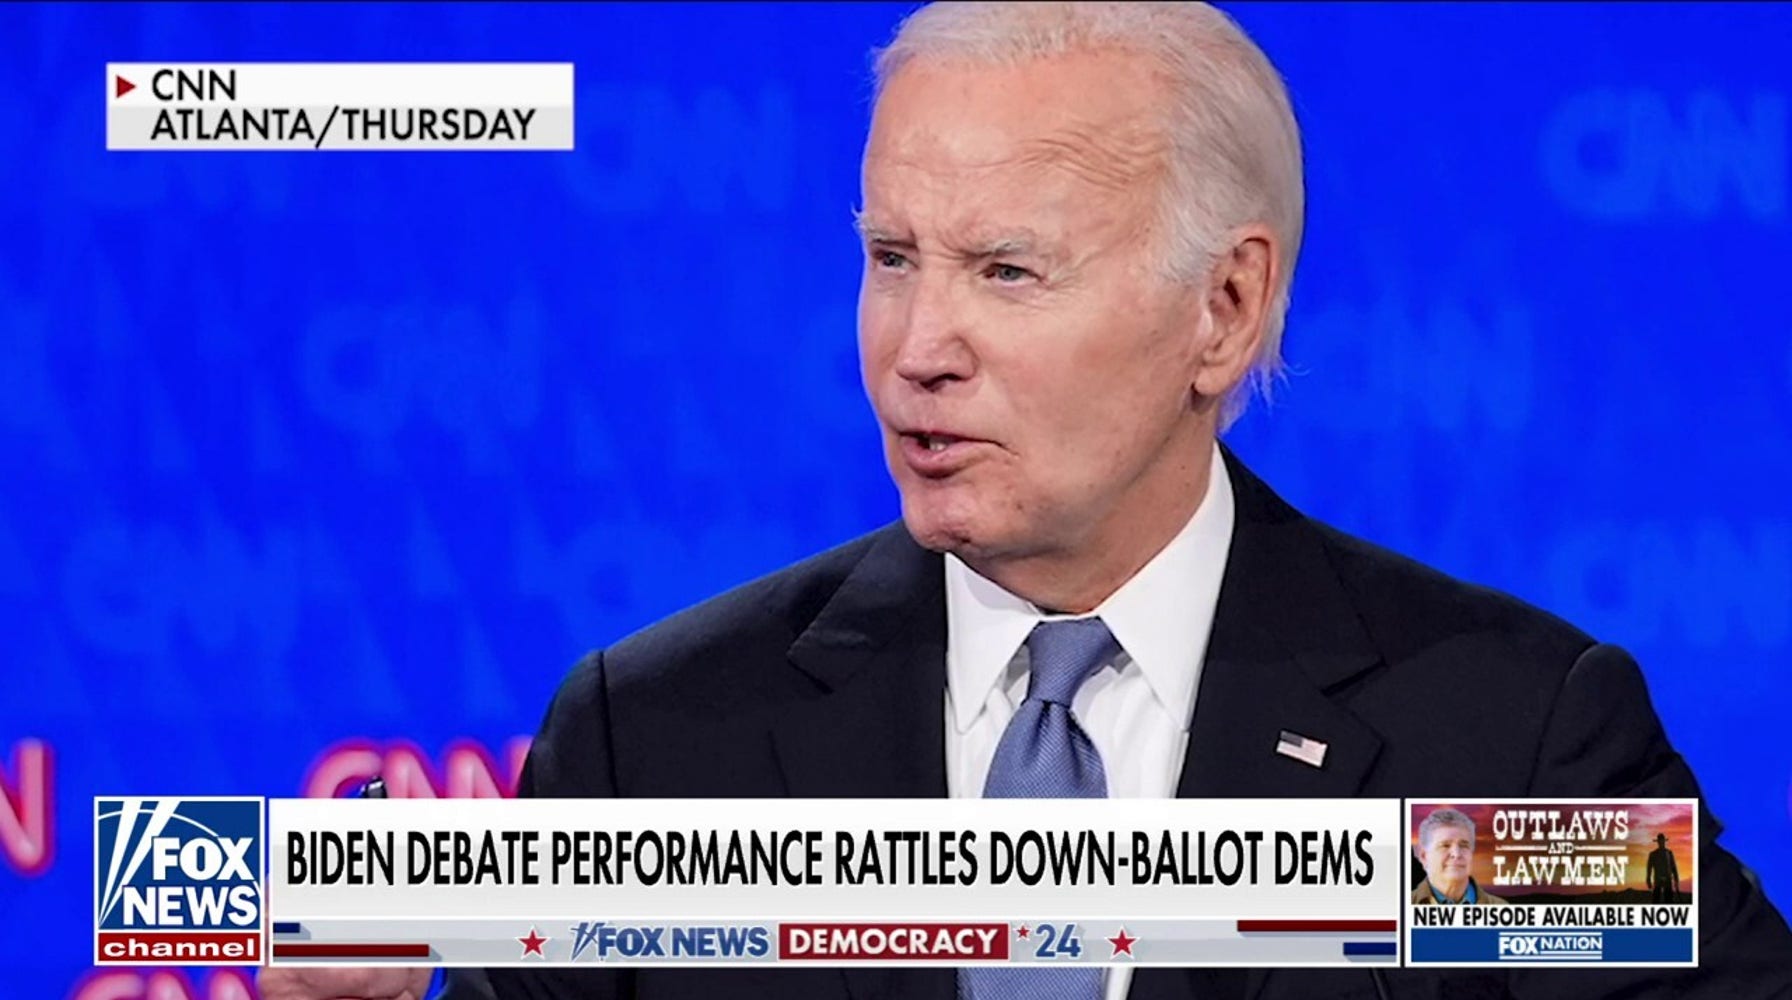 Biden's Debate Performance: Sparks Concerns and Calls for Democrats to Withdraw